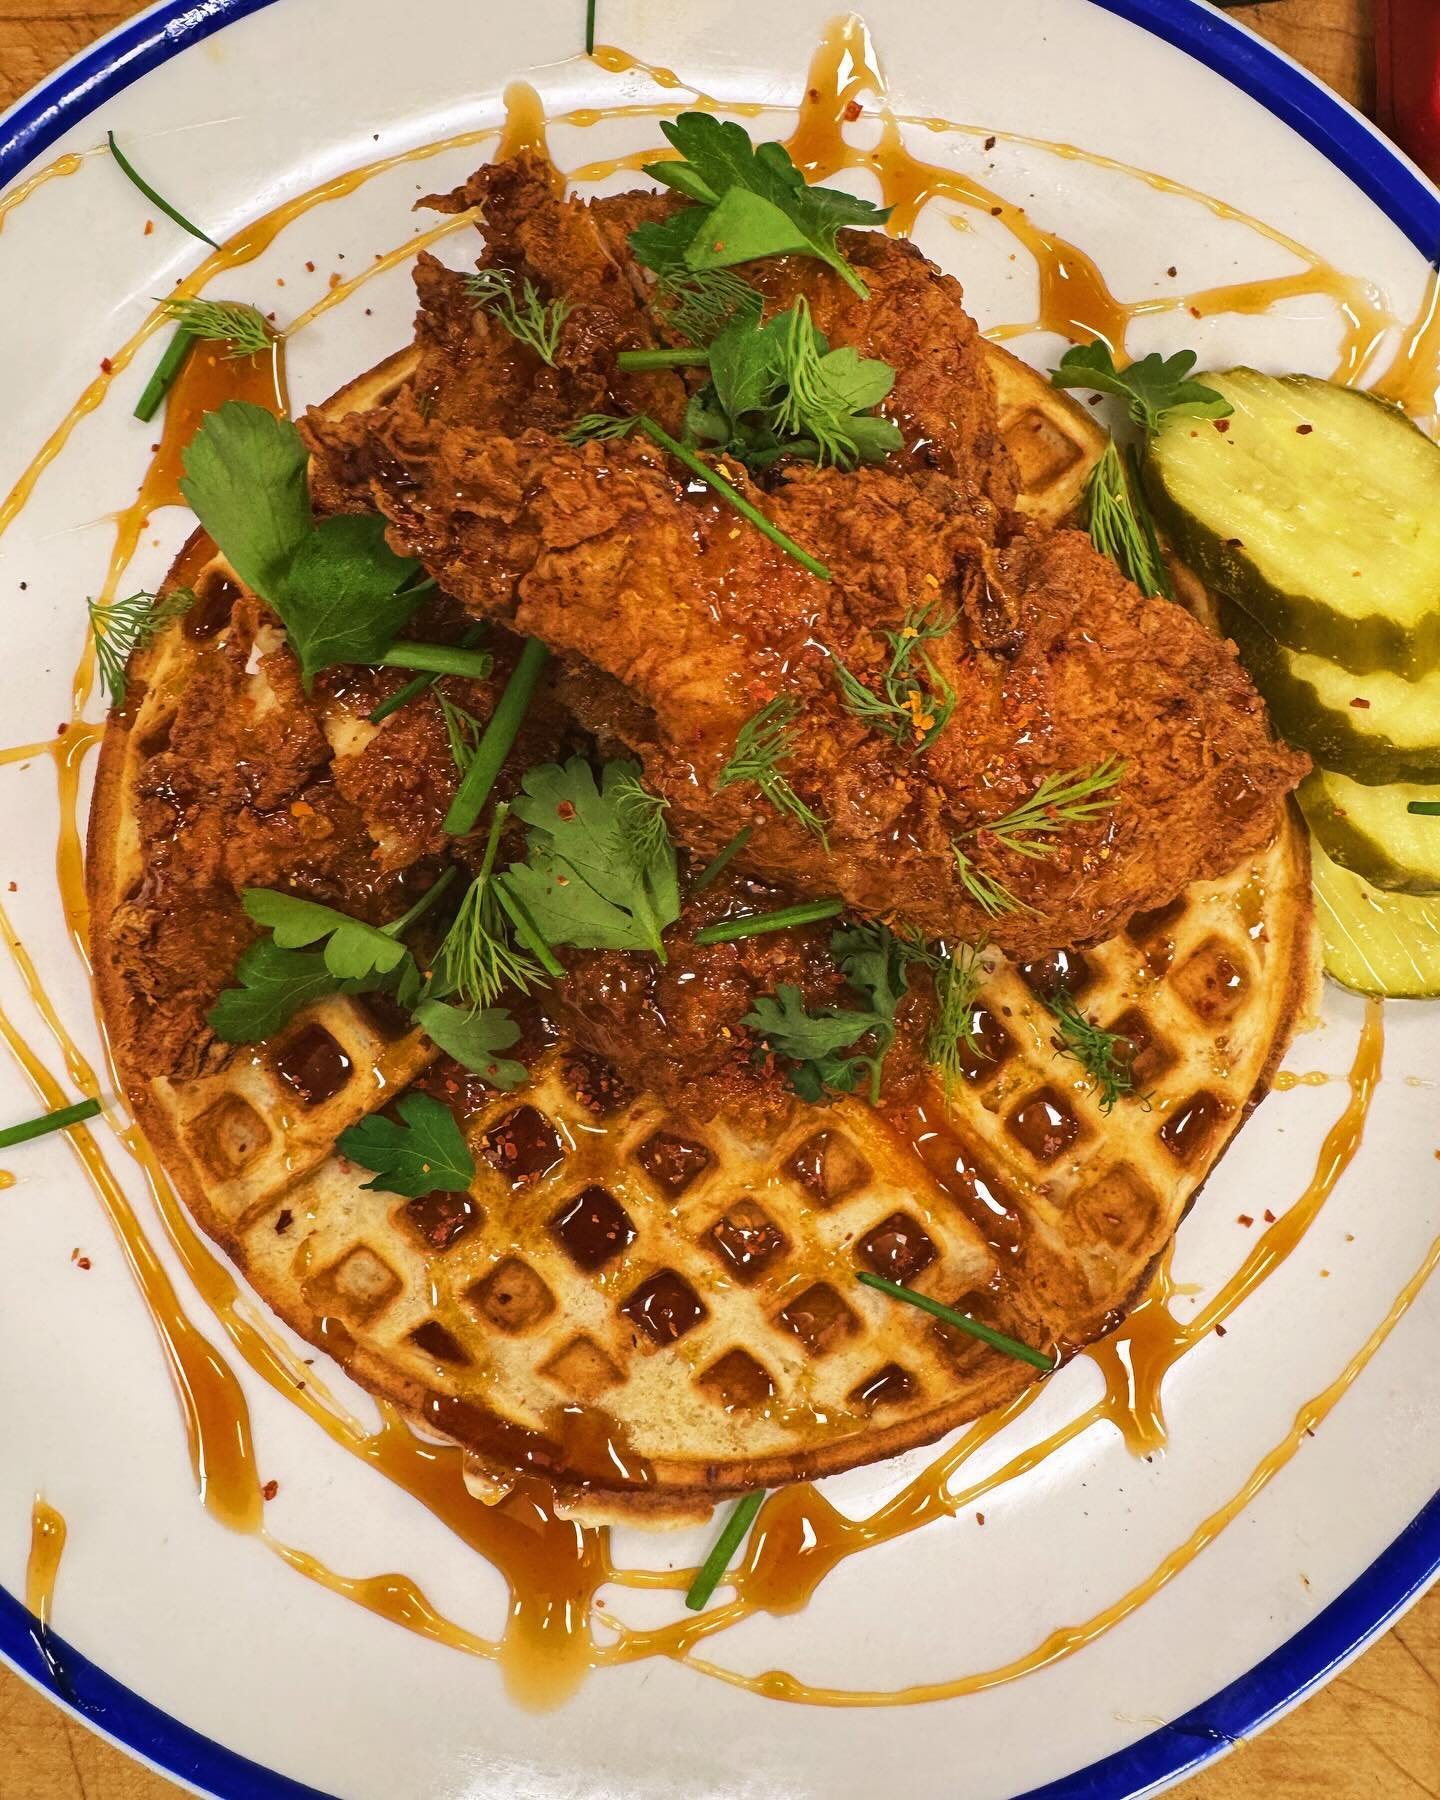 It&rsquo;s back. A really old school version of chicken waffles we use to rock at our previous restaurant Juniper. Fish sauce caramel, gochuchang peanut butter, pickles, and herbs. It&rsquo;s back just for a limited time though (unless y&rsquo;all fo